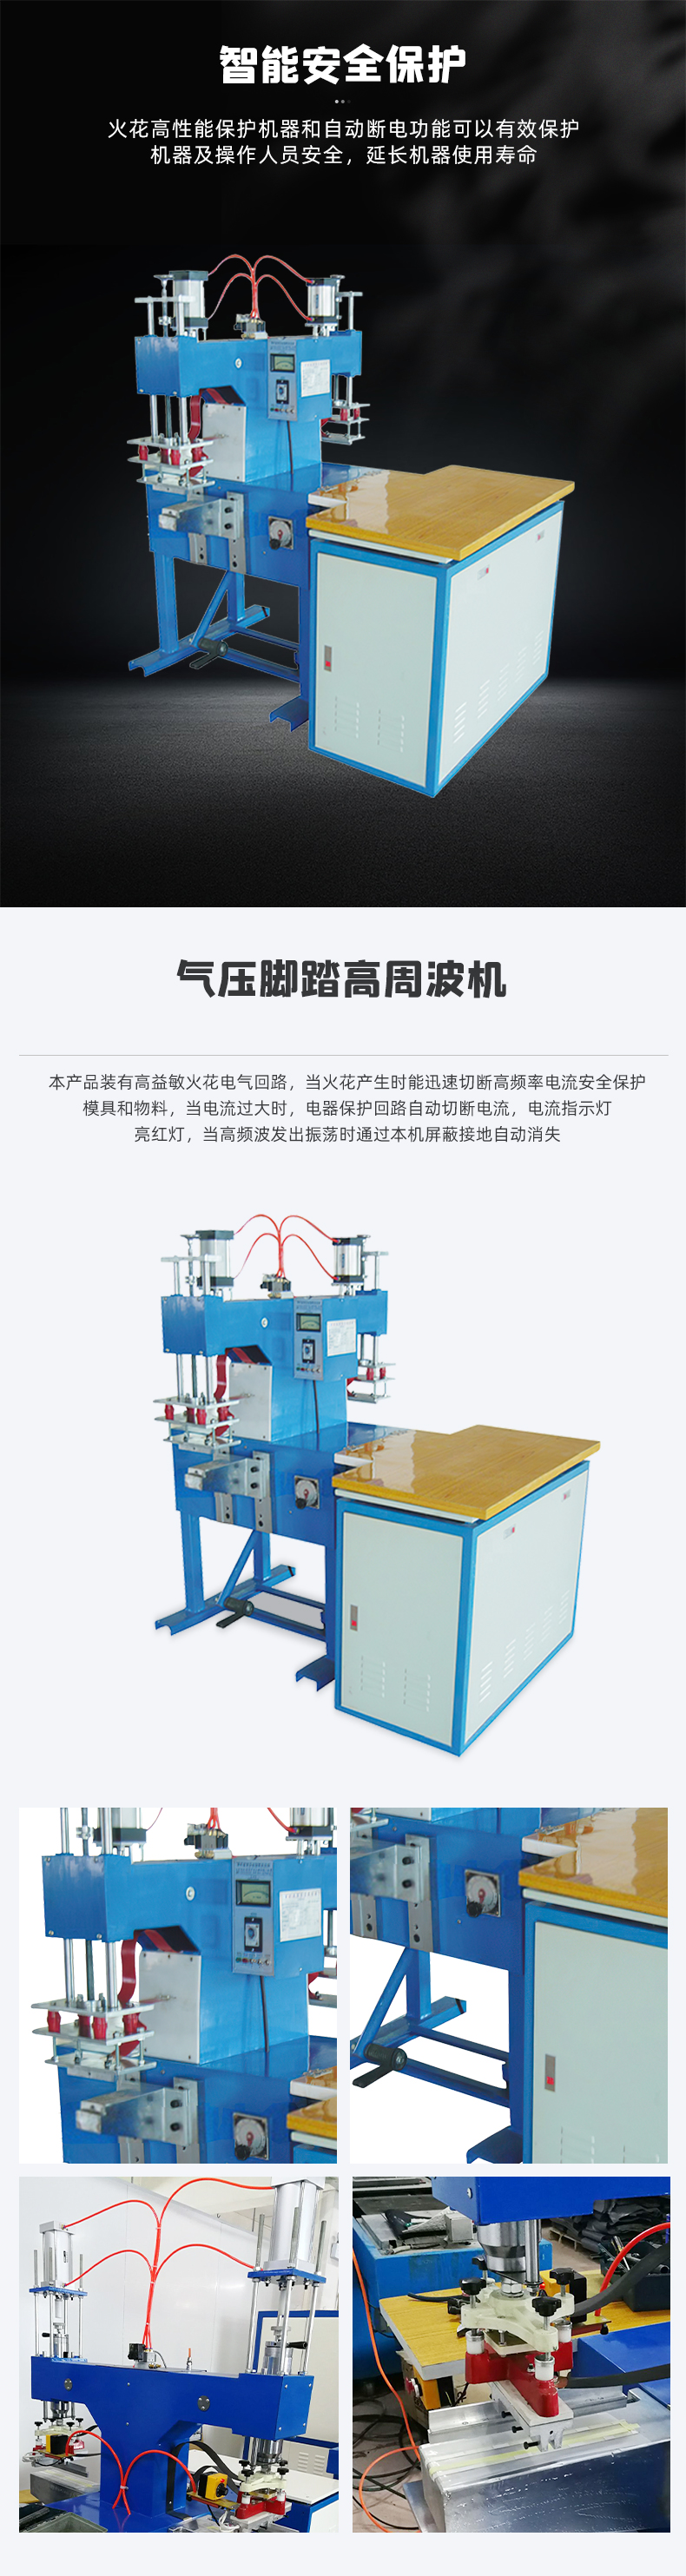 Pneumatic pedal high frequency machine PVC plastic fusion welding machine embossing and stamping high frequency heat sealing machine Huaxuan Sheng